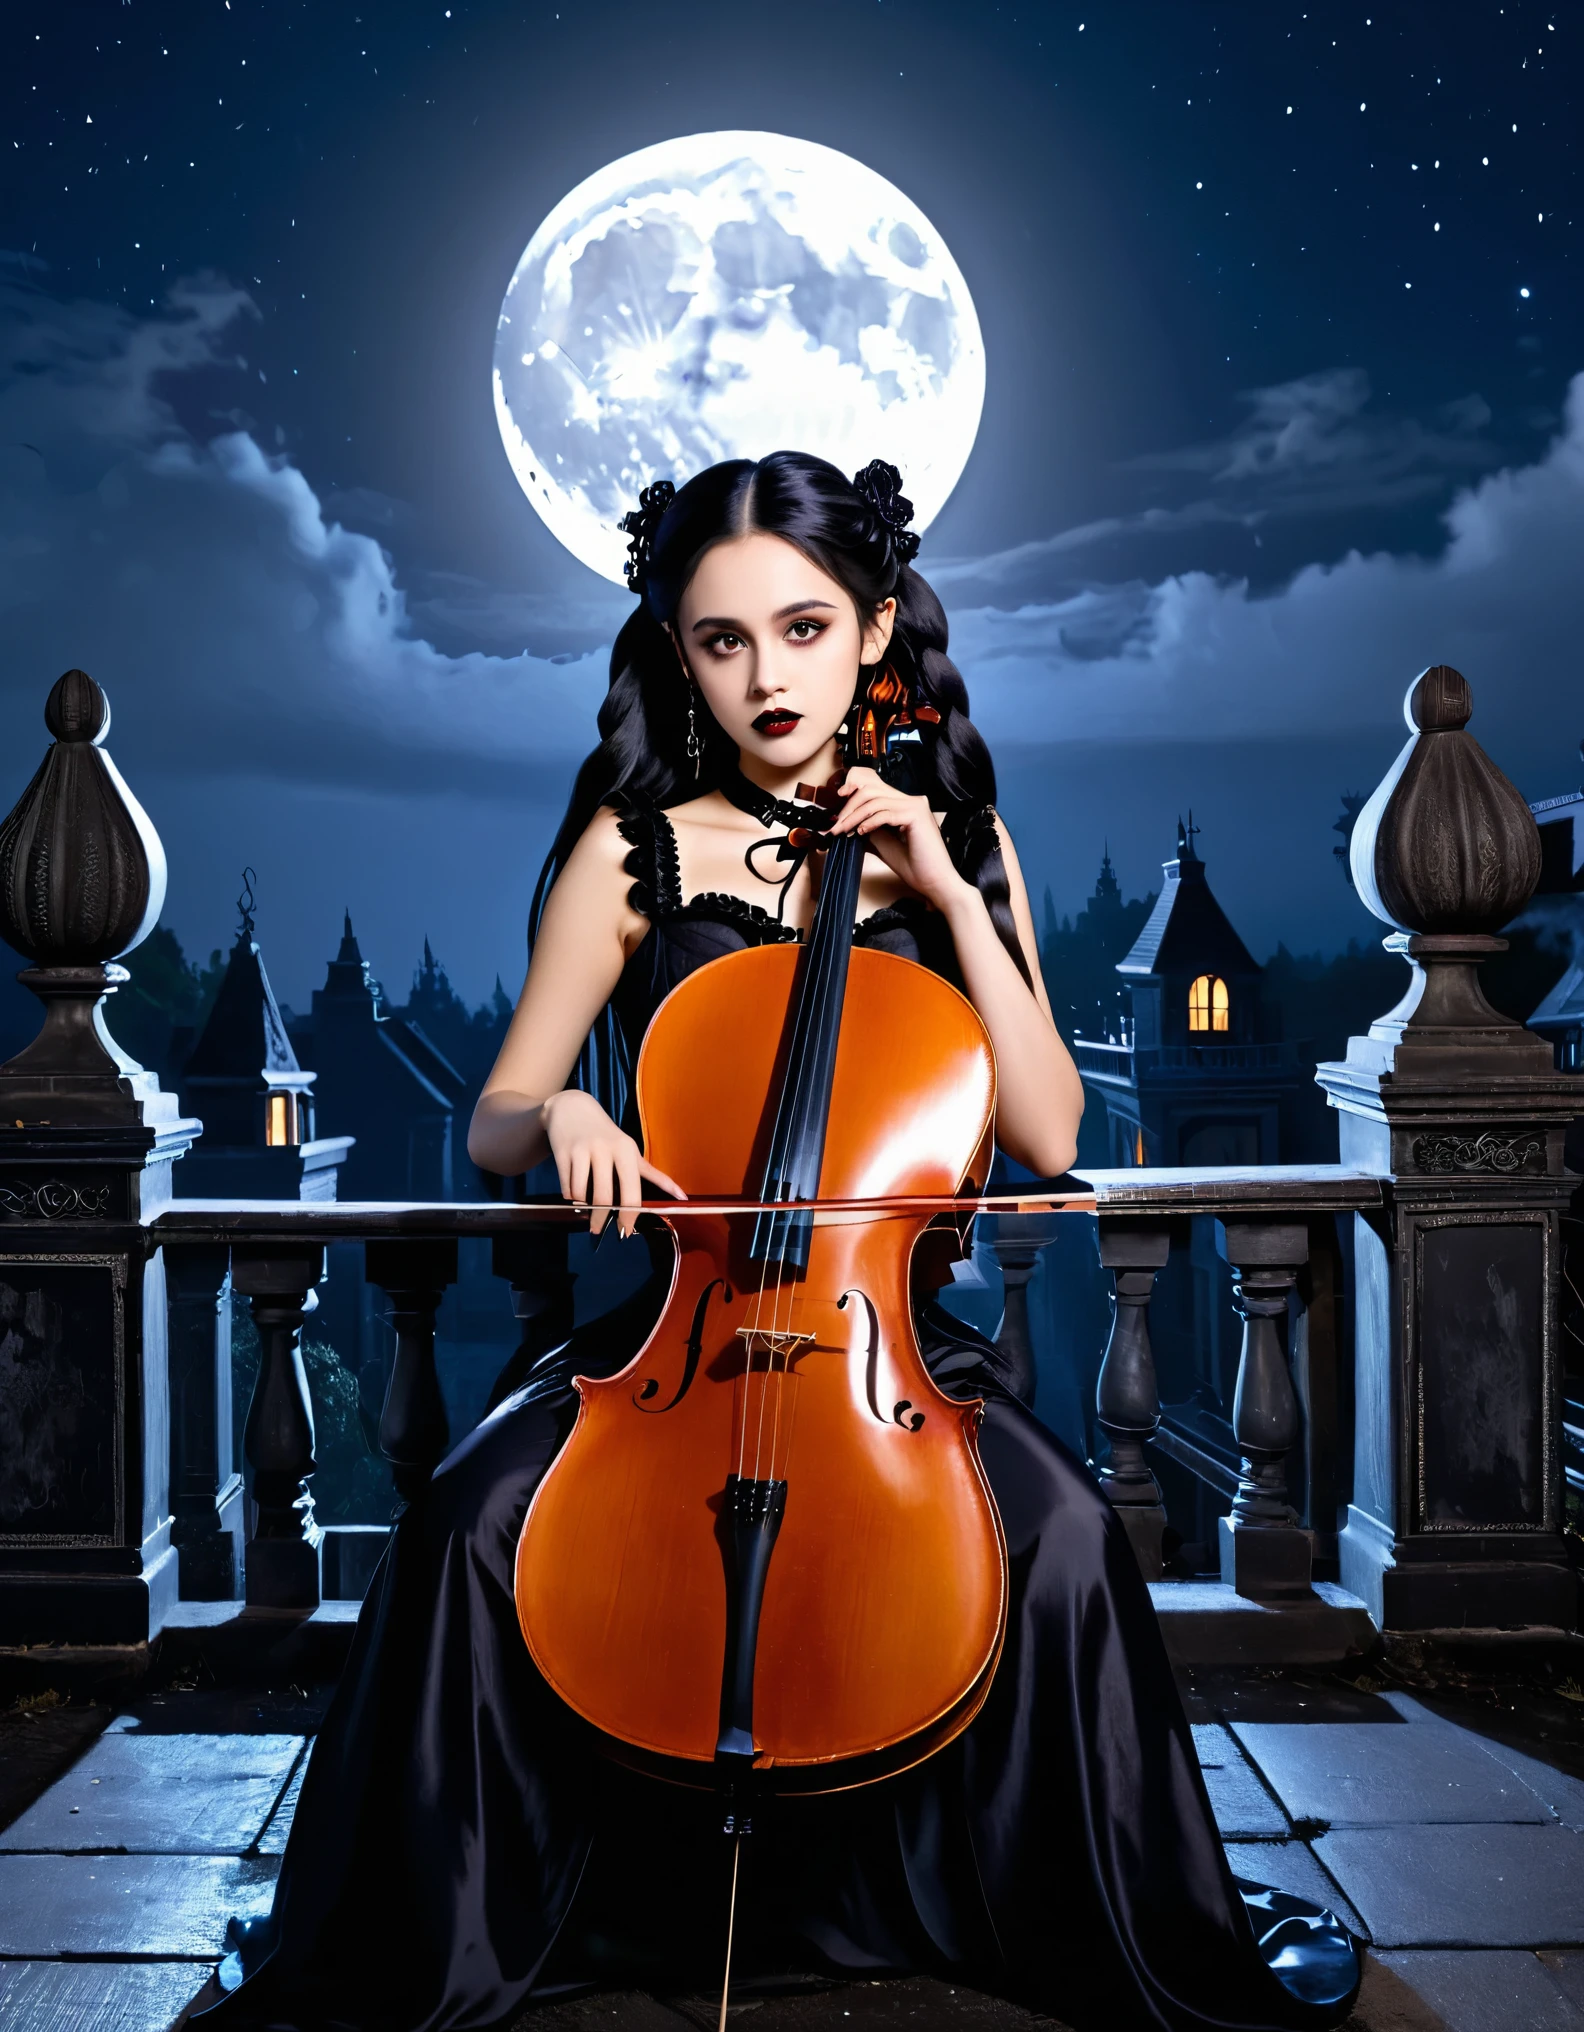 A young woman with long black hair styled in two braids and wears minimal makeup with dark eyeliner, black lipstick, sexy goth, Wednesday Addams (Jenna Ortega). Jenna Ortega as Wednesday Addams.  The setting is on the roof top of an old decaying mansion at midnight with a big bright full moon in the background. Wednesday is sitting in an old luxury ornate high back chair (playing a large cello:1.6). She is wearing black ornate fabric choker, black corset, black short feathered dress with black stockings. A peculiar, lifelike severed hand is on her shoulder, adding an element of mystery. The lighting is eerie, coming from an unseen source, creating a since of mystery and intriguing atmosphere. Hyper realistic photo, vibrant colors, 16k.